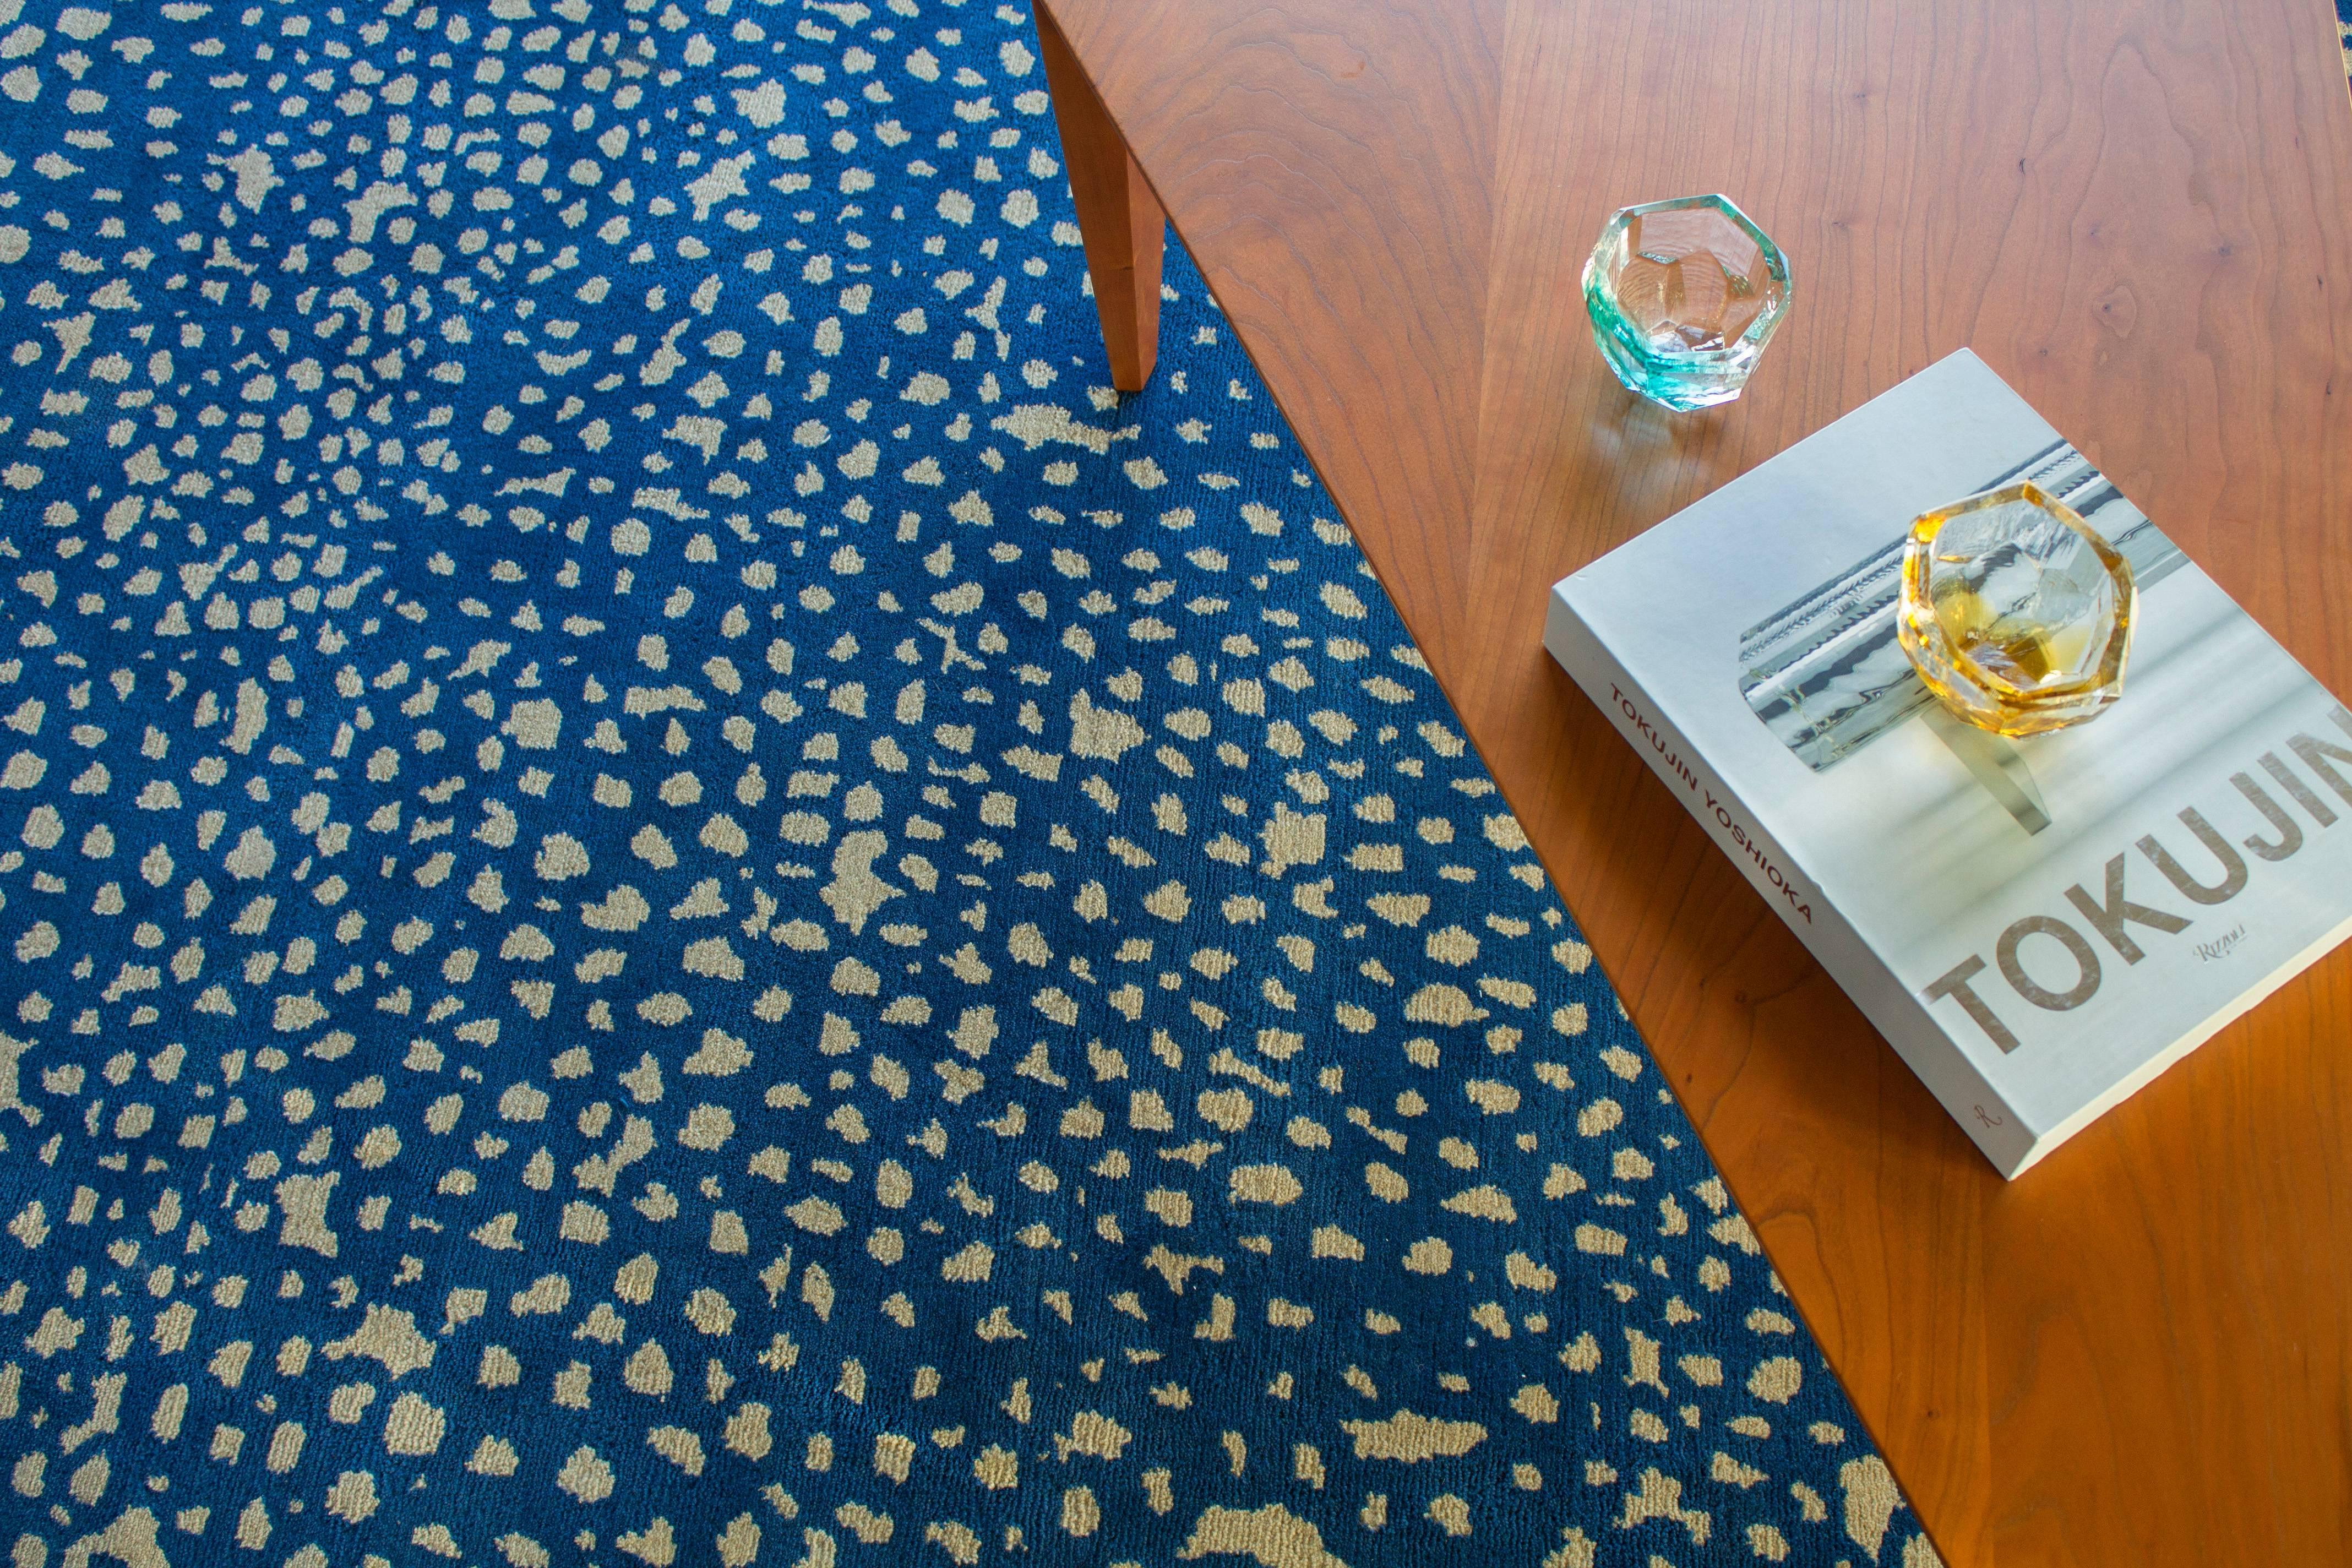 Vast as the night sky, the chaos of the Starry or Sapphire pattern resolves into a calming and expansive design, combining simple and organic circular shapes in brilliant blue and natural. Hand-knotted with 100% New Zealand wool, every Angela Adams